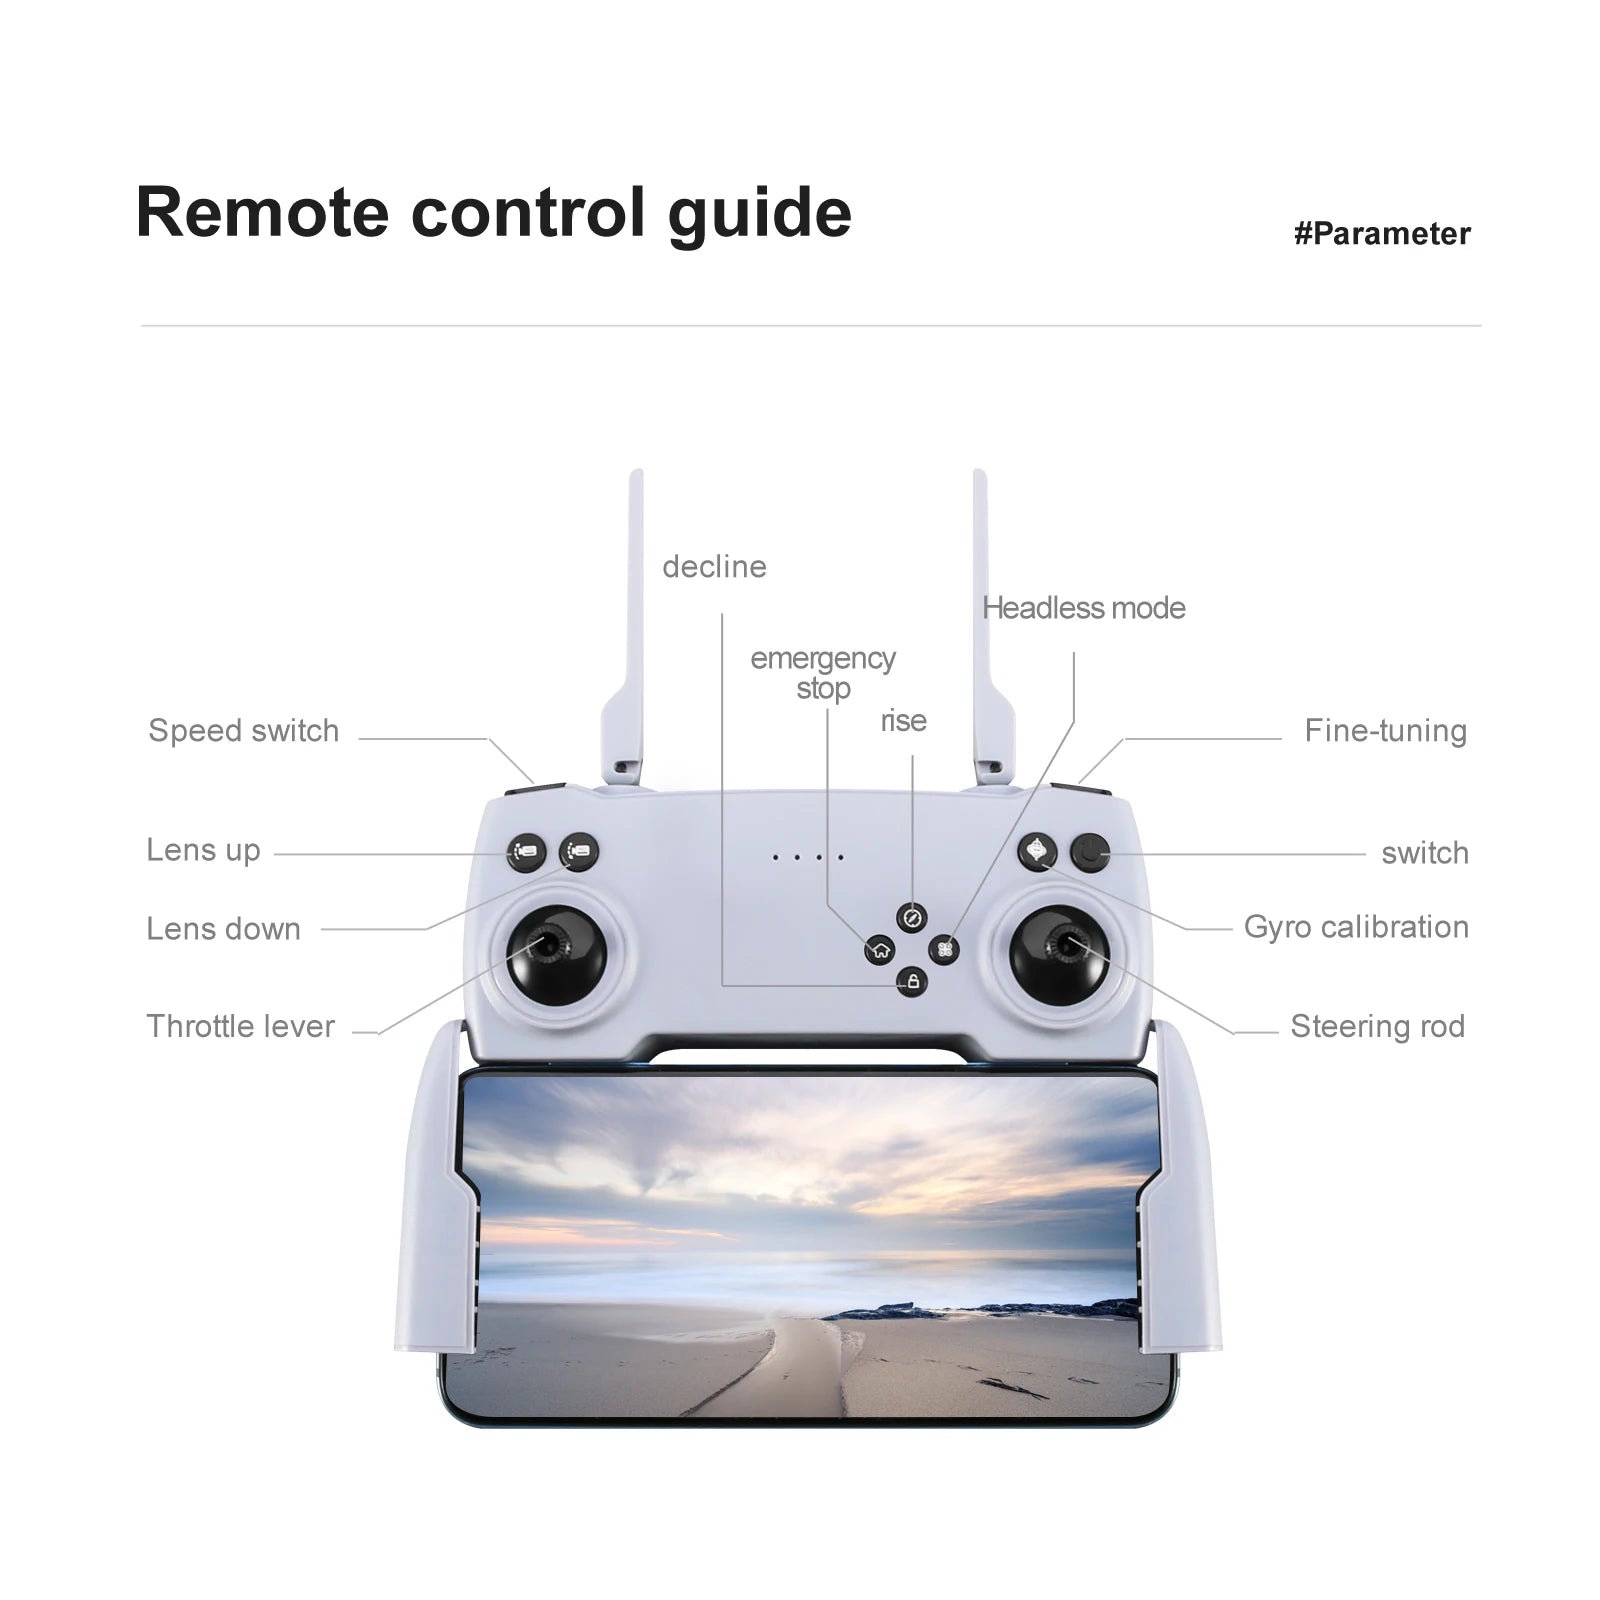 S90 Mini Drone, remote control guide #parameter decline headless mode emergency speed switch rise